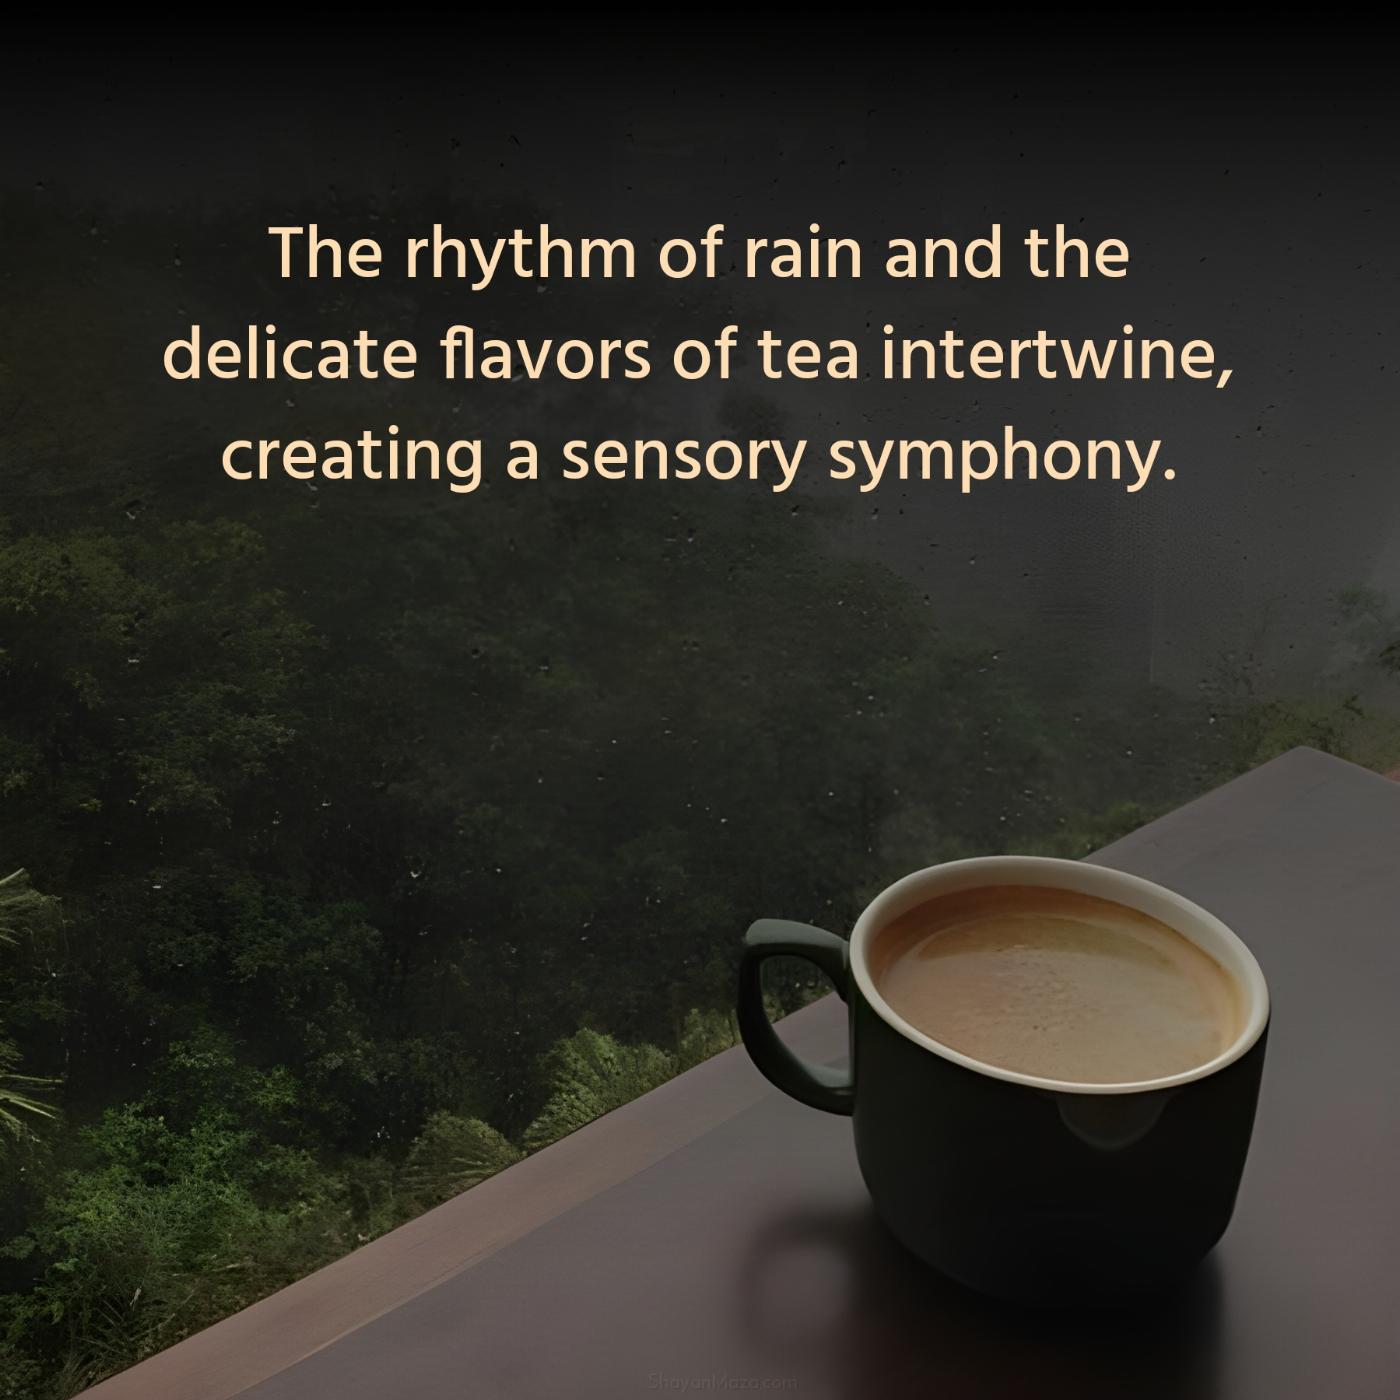 The rhythm of rain and the delicate flavors of tea intertwine